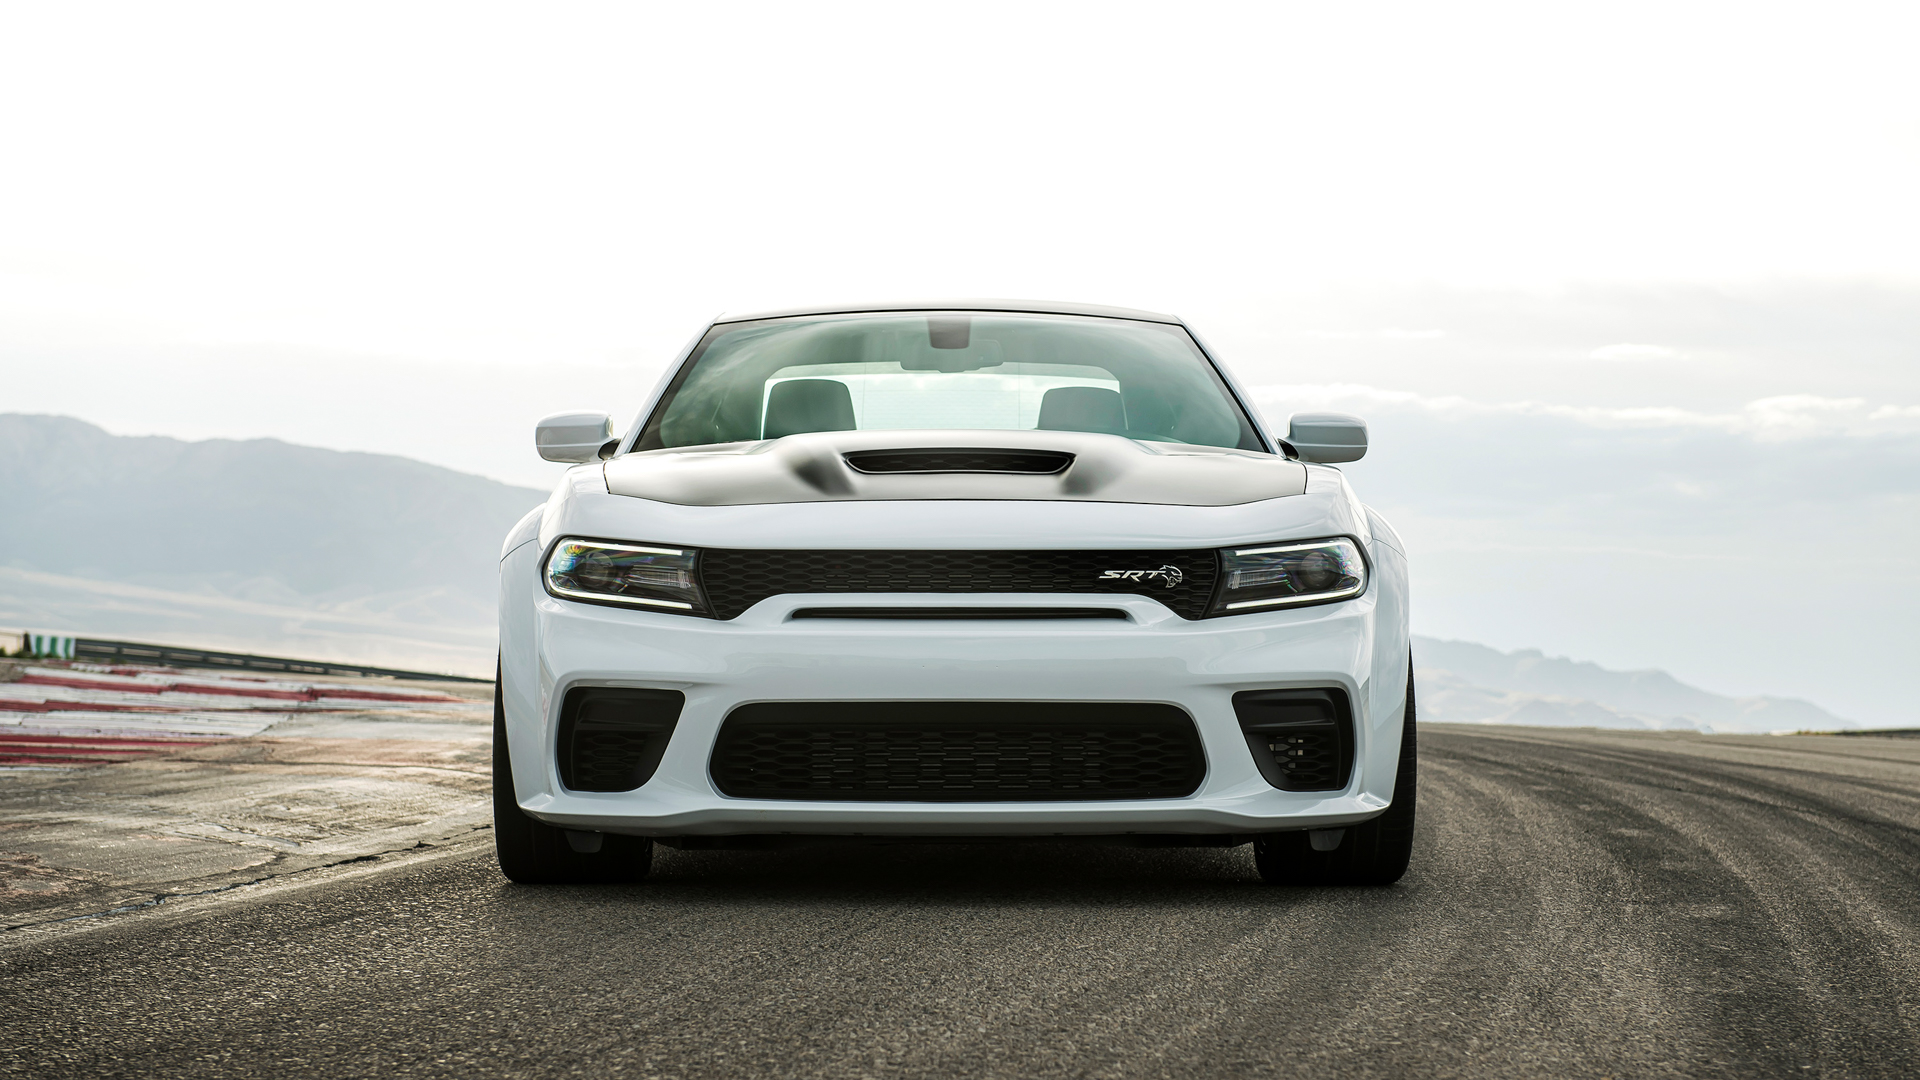 Dodge Charger Hellcat Is Still America’s Most Stolen Car and It’s Not Even Close